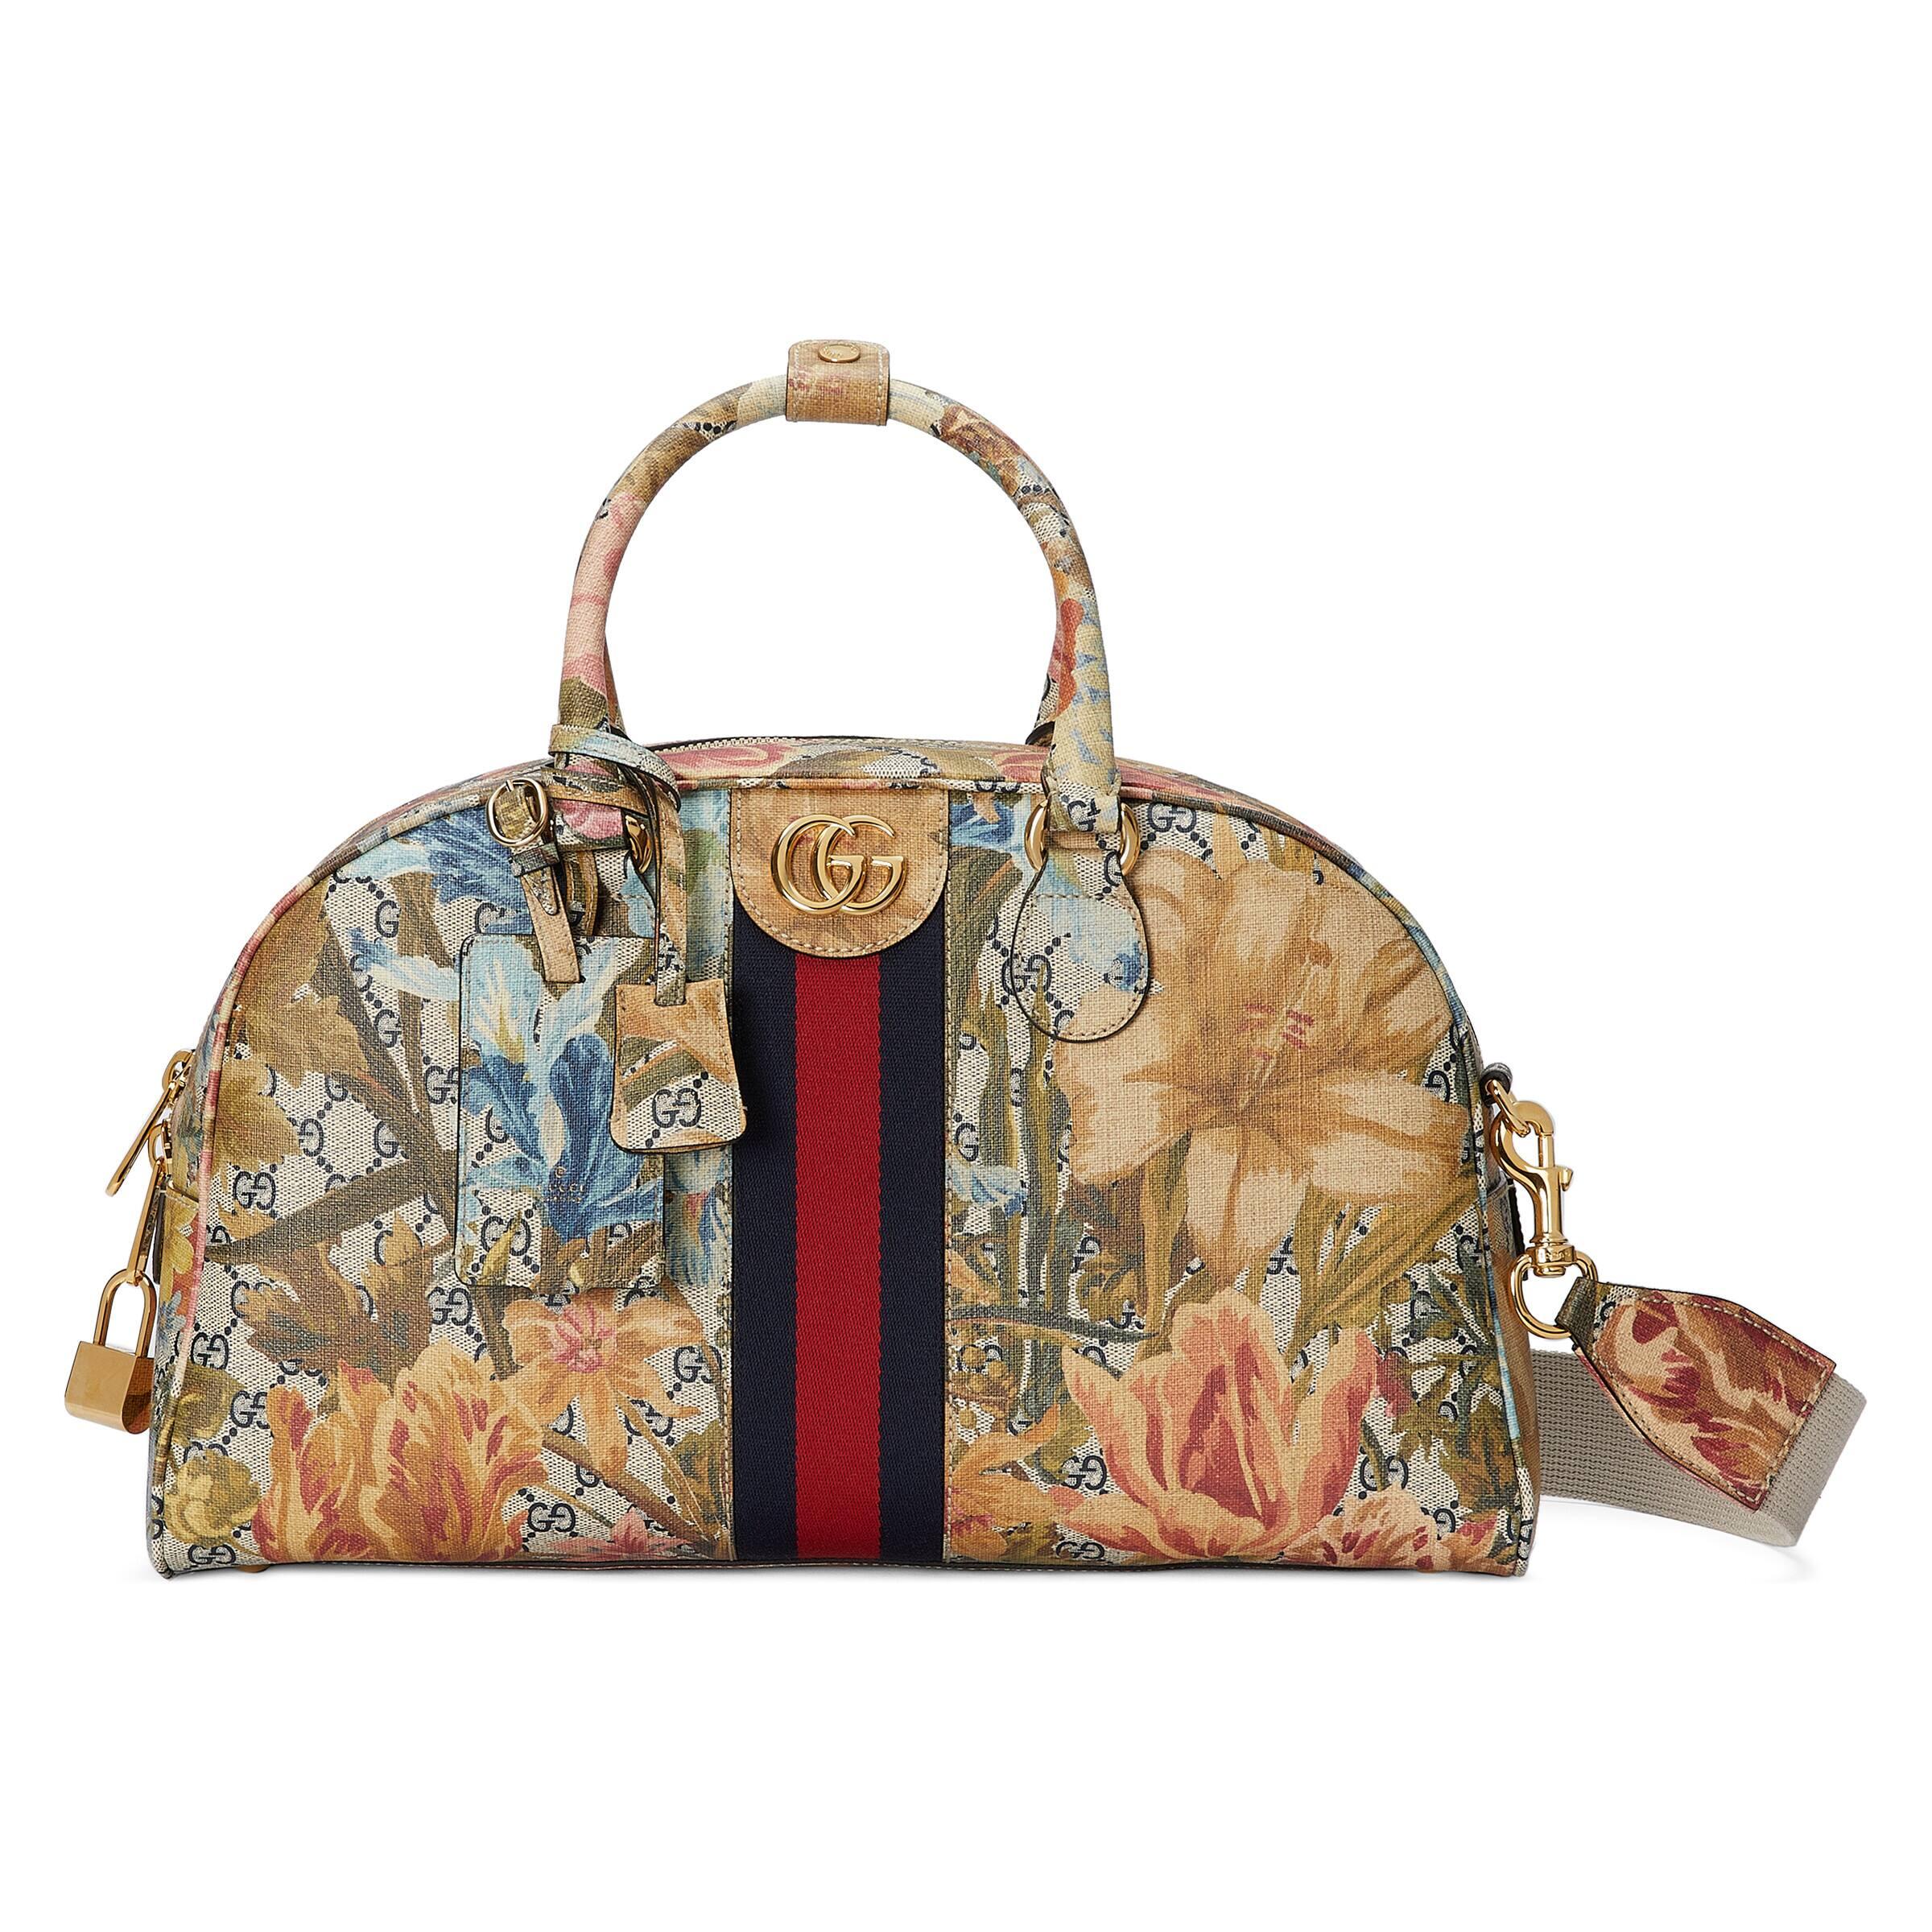 Gucci Ophidia GG medium travel duffle bag | 3D Model Collection